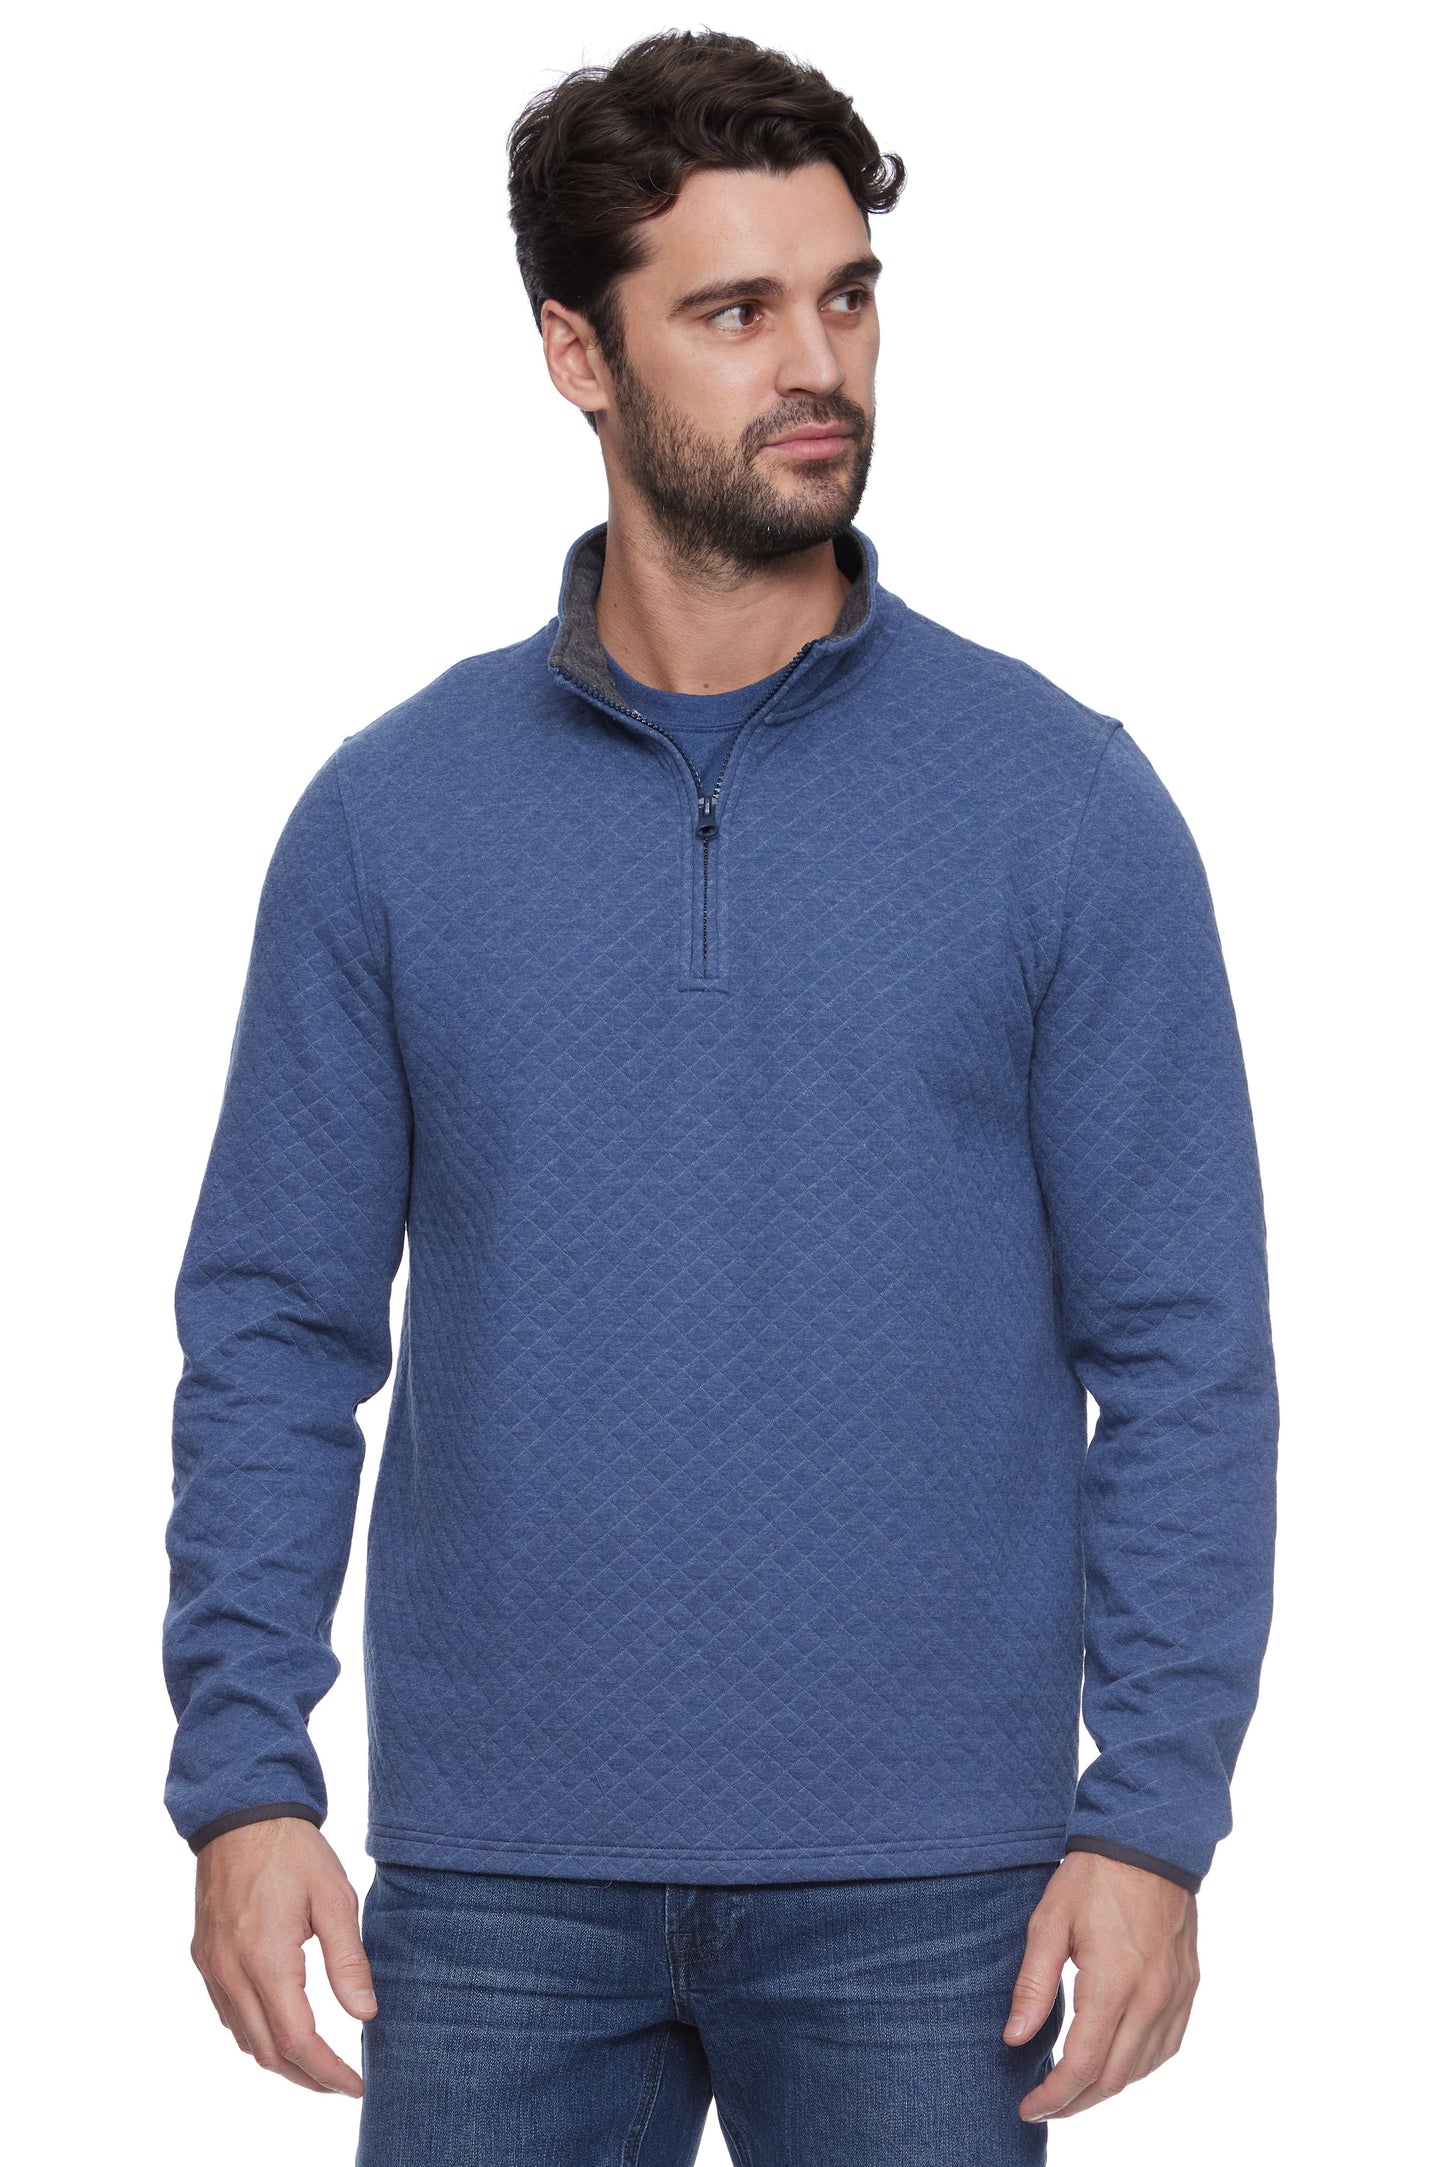 Flag and Anthem Quilted Mock Neck 1/4 Zip Navy